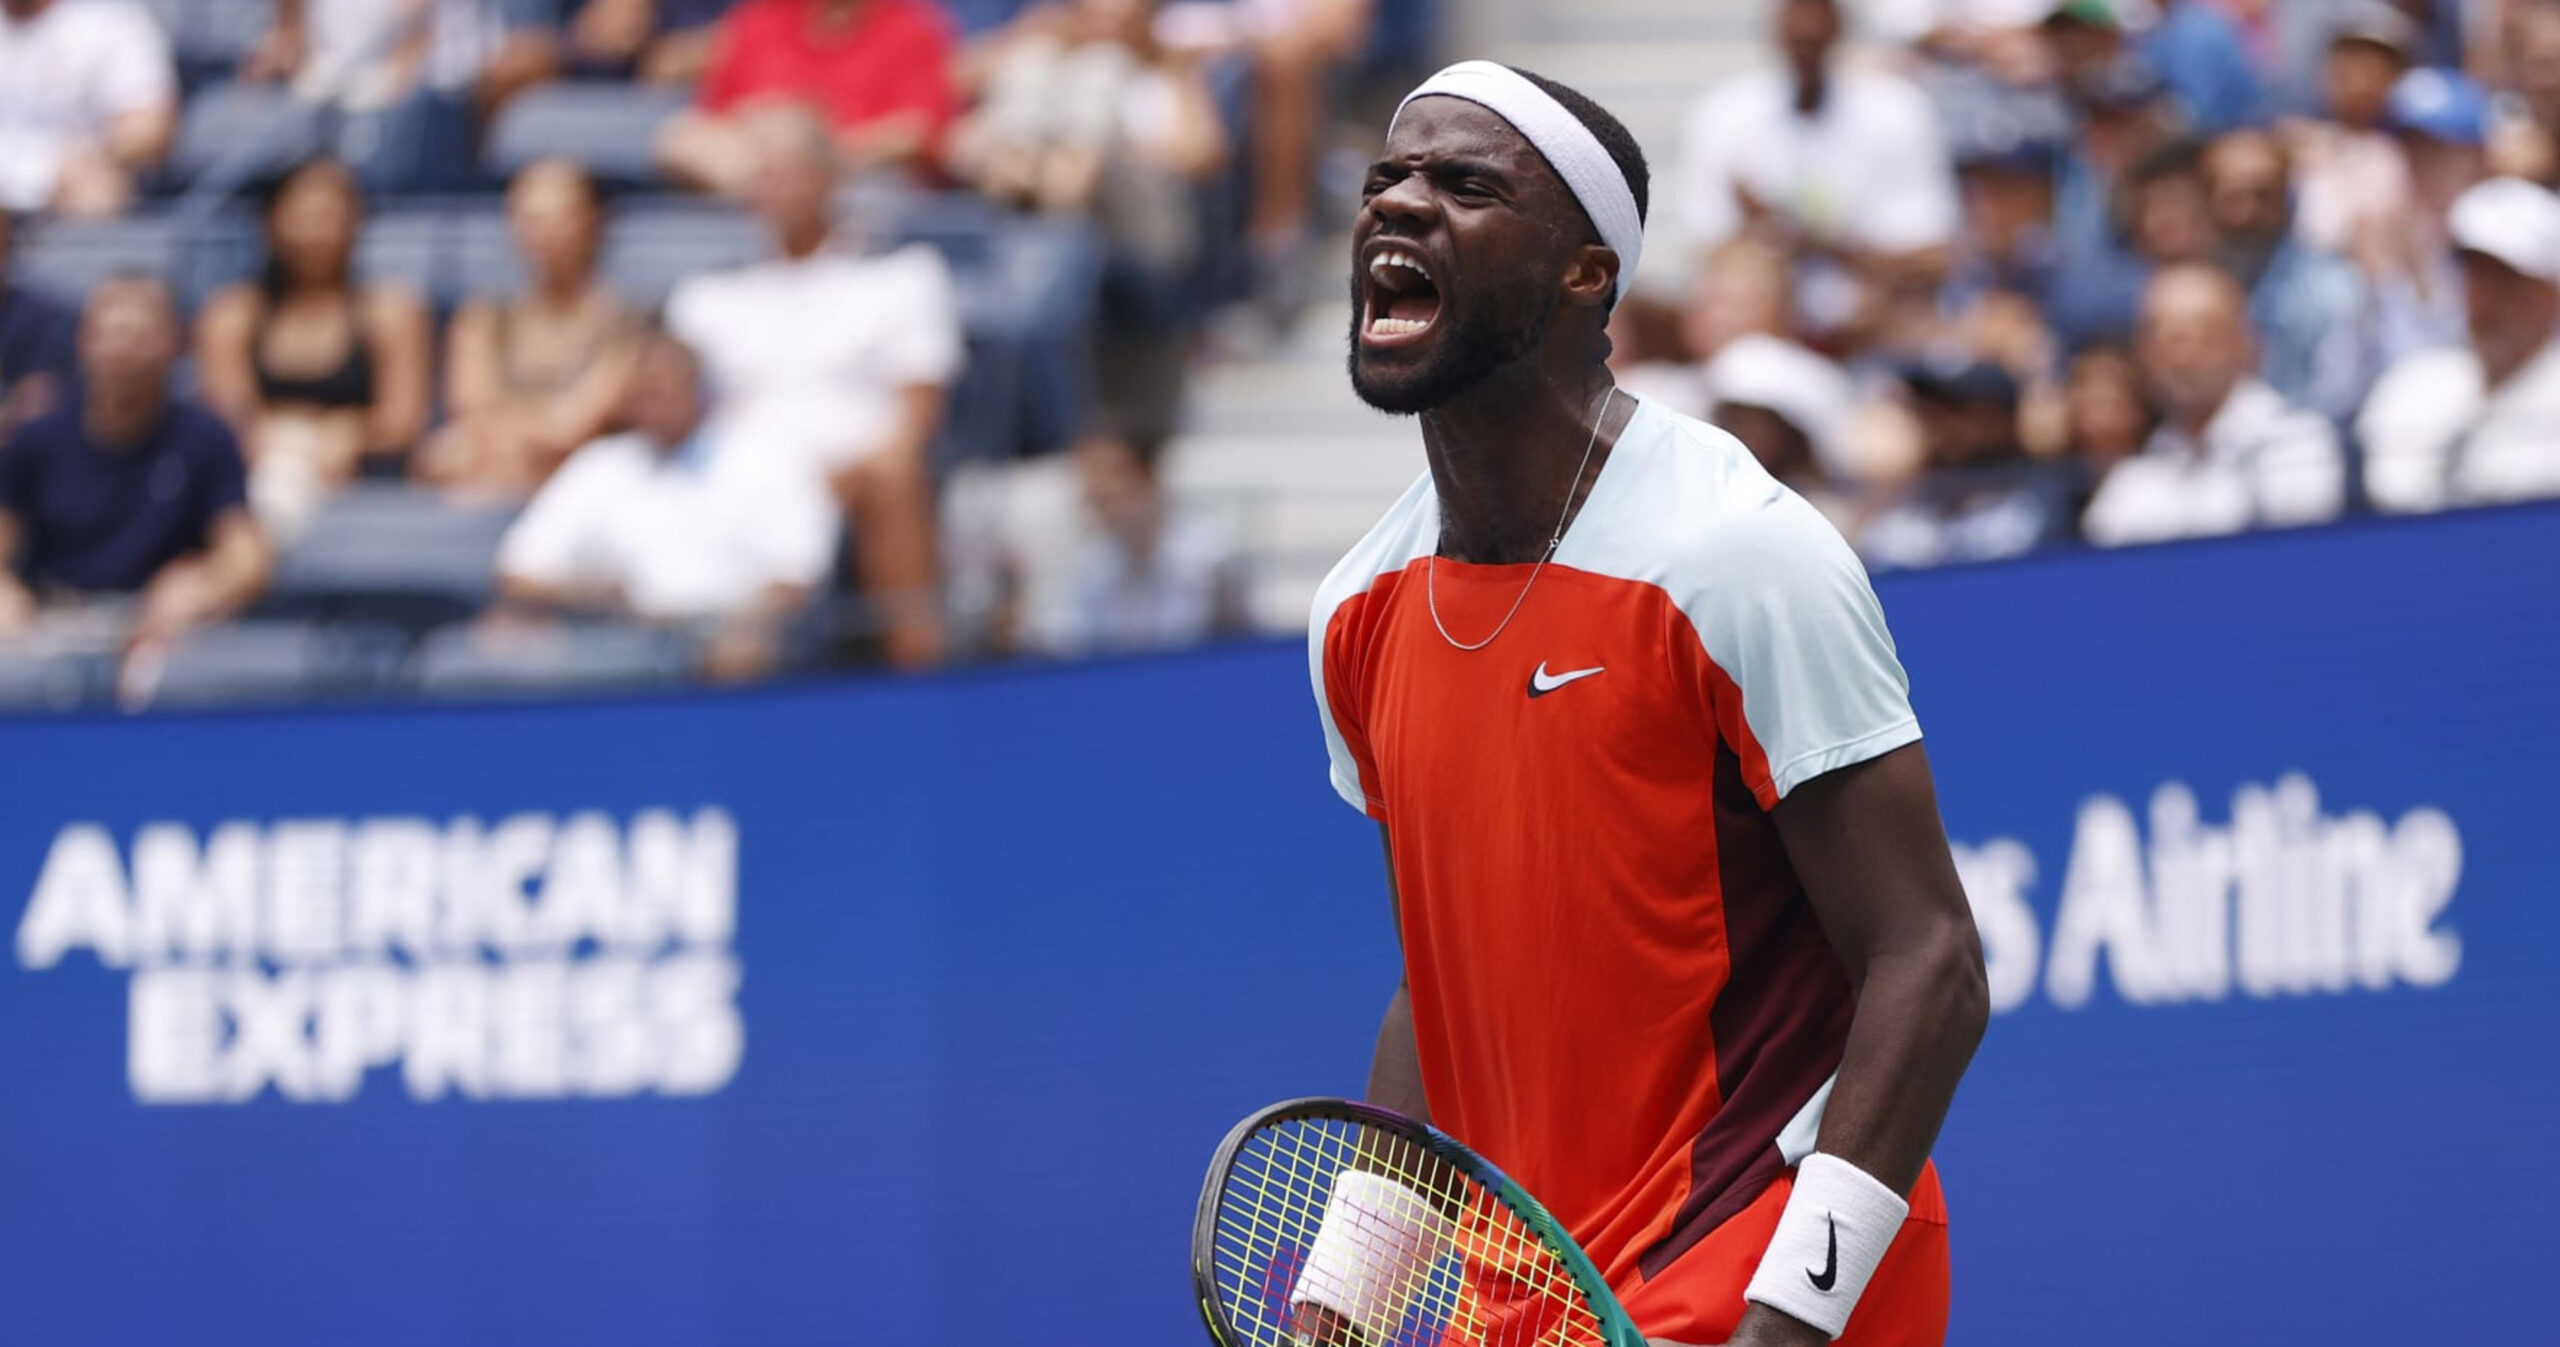 Rafael Nadal Upset by Frances Tiafoe in Round of 16 at 2022 US Open